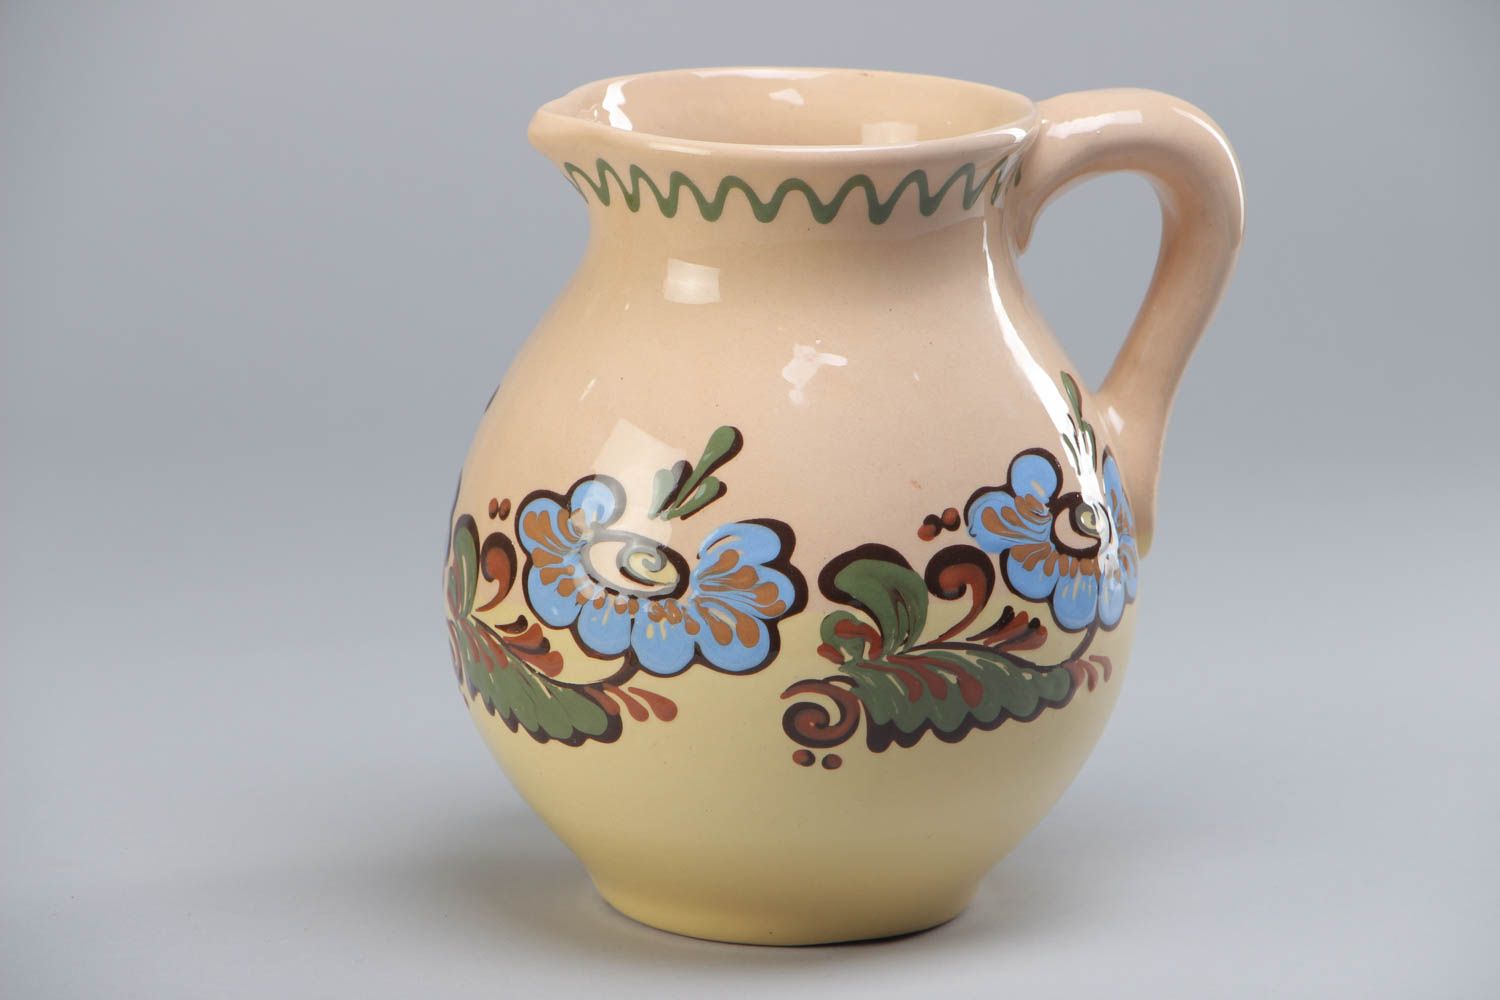 60 oz ceramic water jug with handle and floral pattern in green, beige, blue colors 1,9 lb photo 2